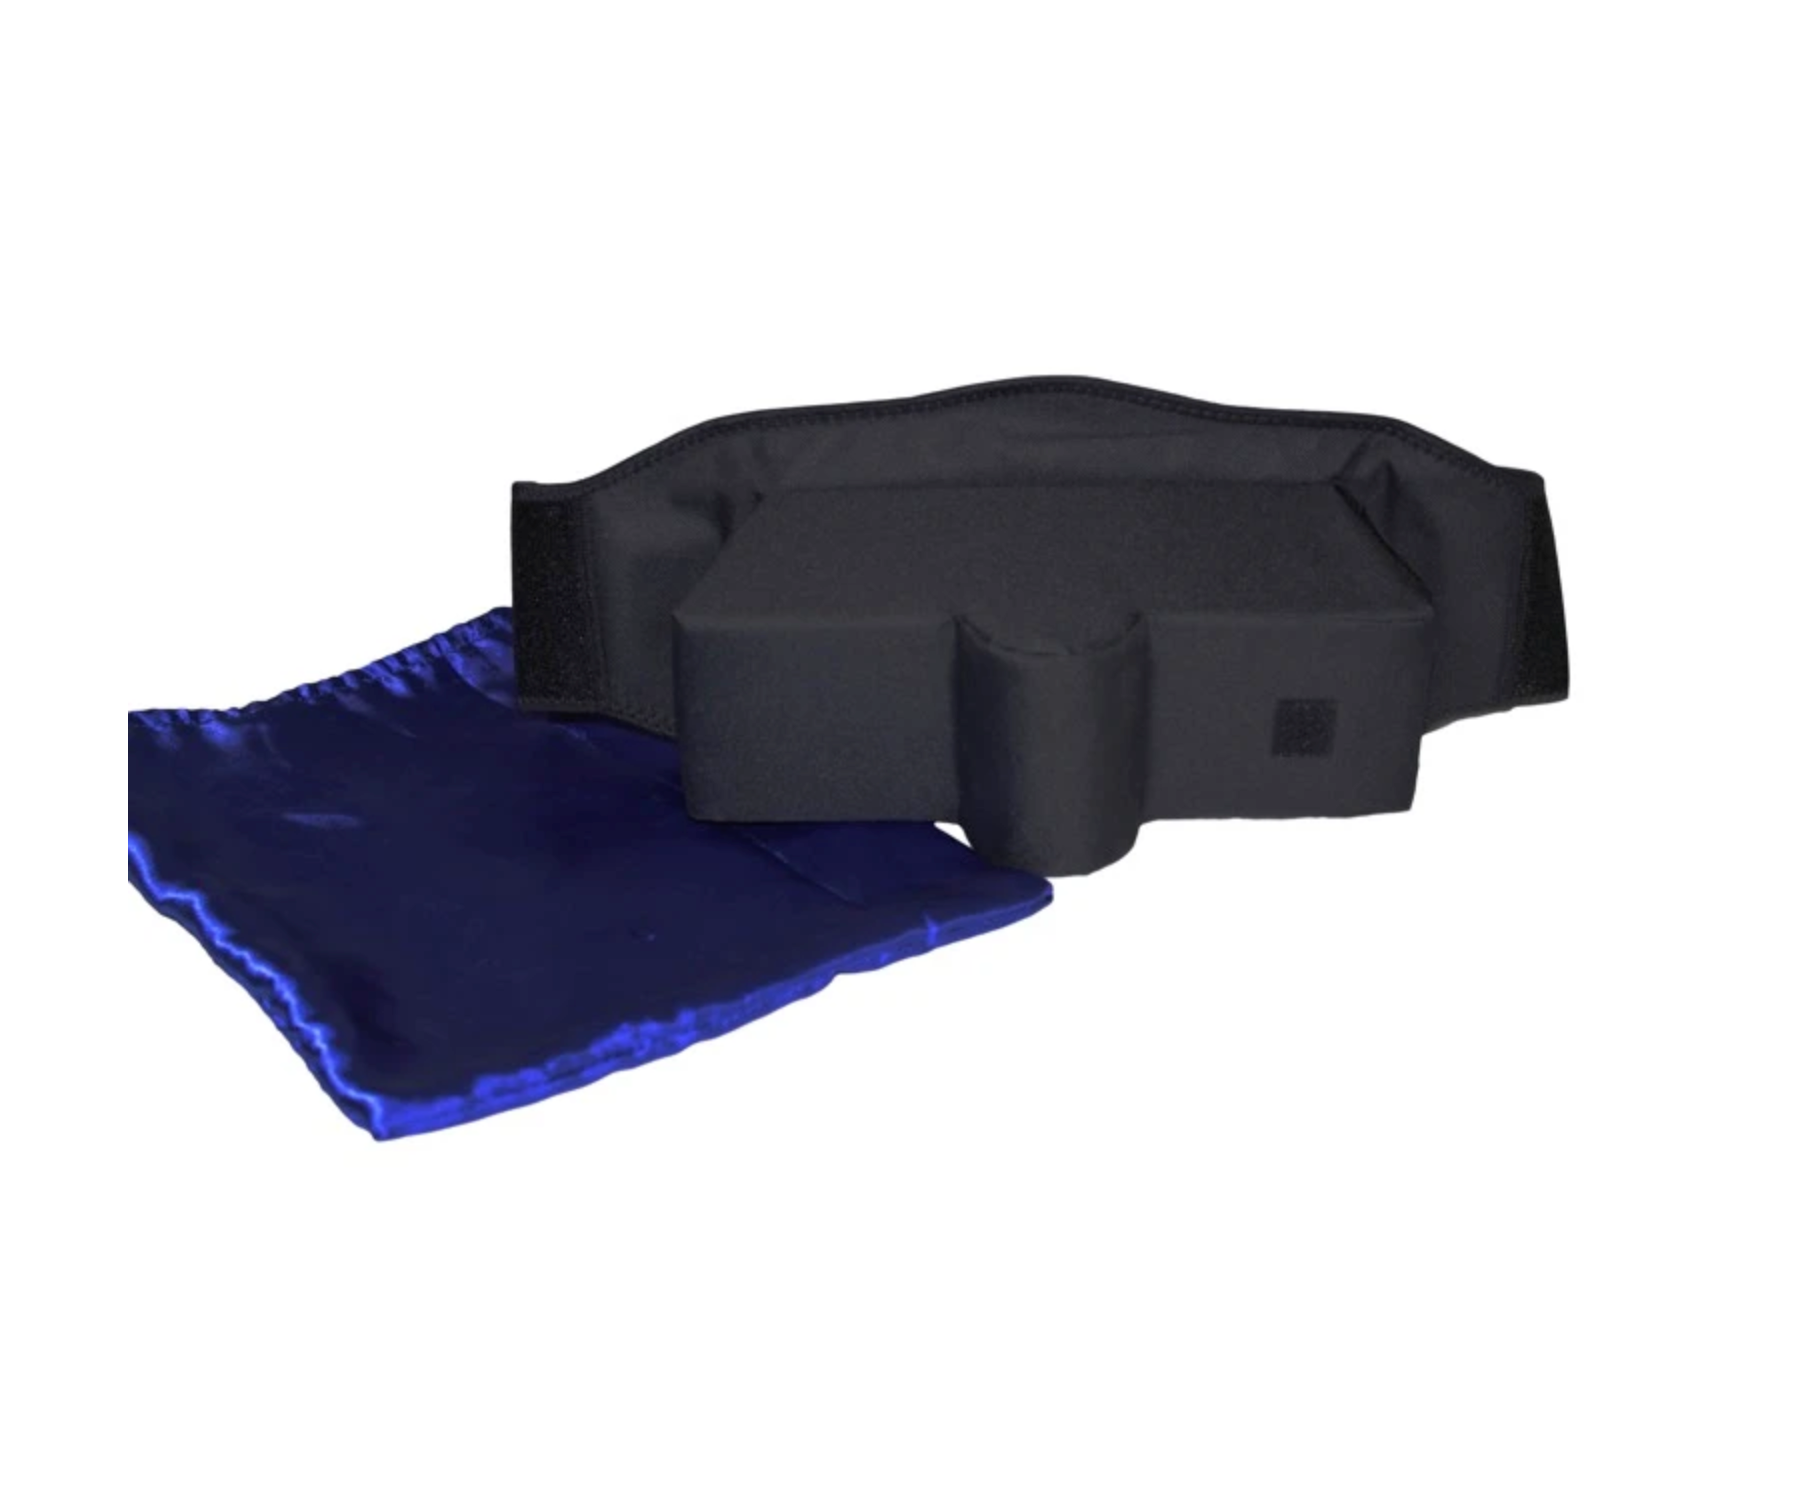 An isolated picture of the Zzoma positional sleep device for Obstructive Sleep Apnea & spring with an included travel bag.